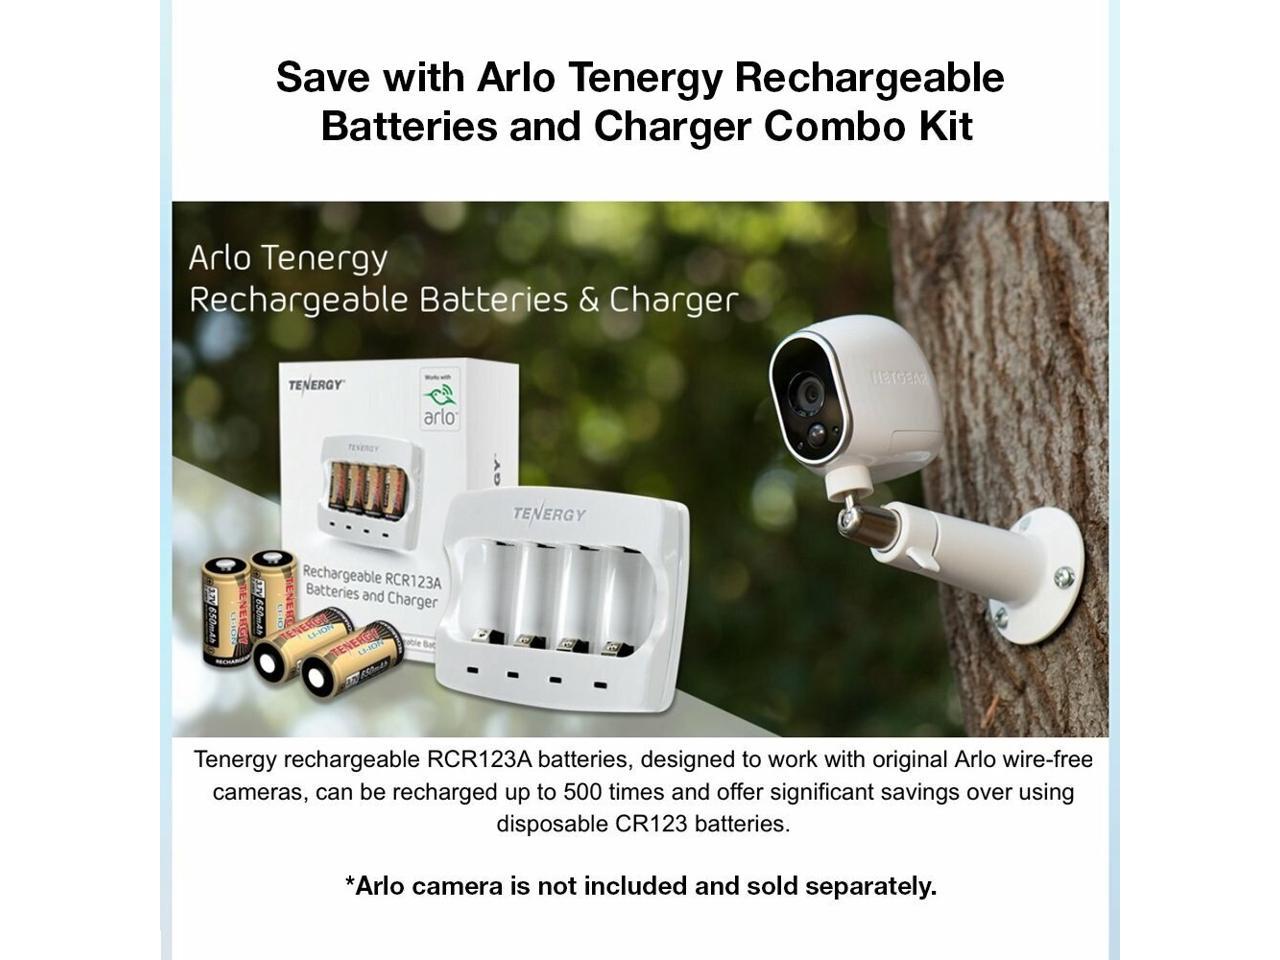 Arlo Certified VMC3030/3200/3330/3430/3530 Fast Charger with 4-Pack 650mAh Rechargeable Batteries UL UN Certified Tenergy 3.7V Arlo Battery Charger for Arlo Wireless Security Cameras 